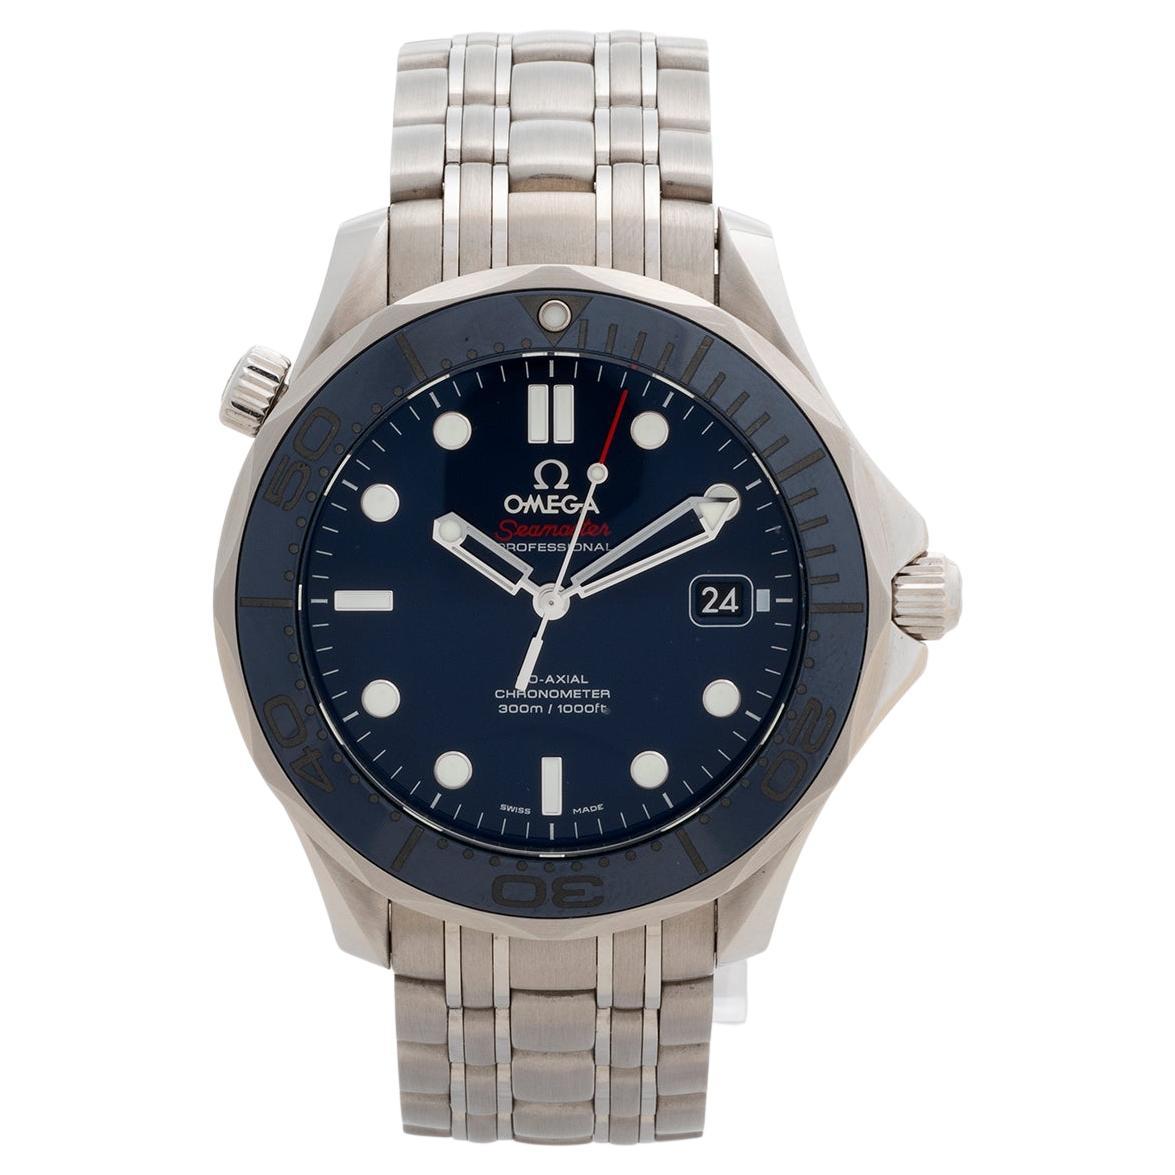 Our Omega Seamaster 300m Professional 2123042003001 features a 41mm stainless steel case with blue dial and blue ceramic bezel and stainless steel bracelet. An iconic dive watch, this example is presented in outstanding condition with only light